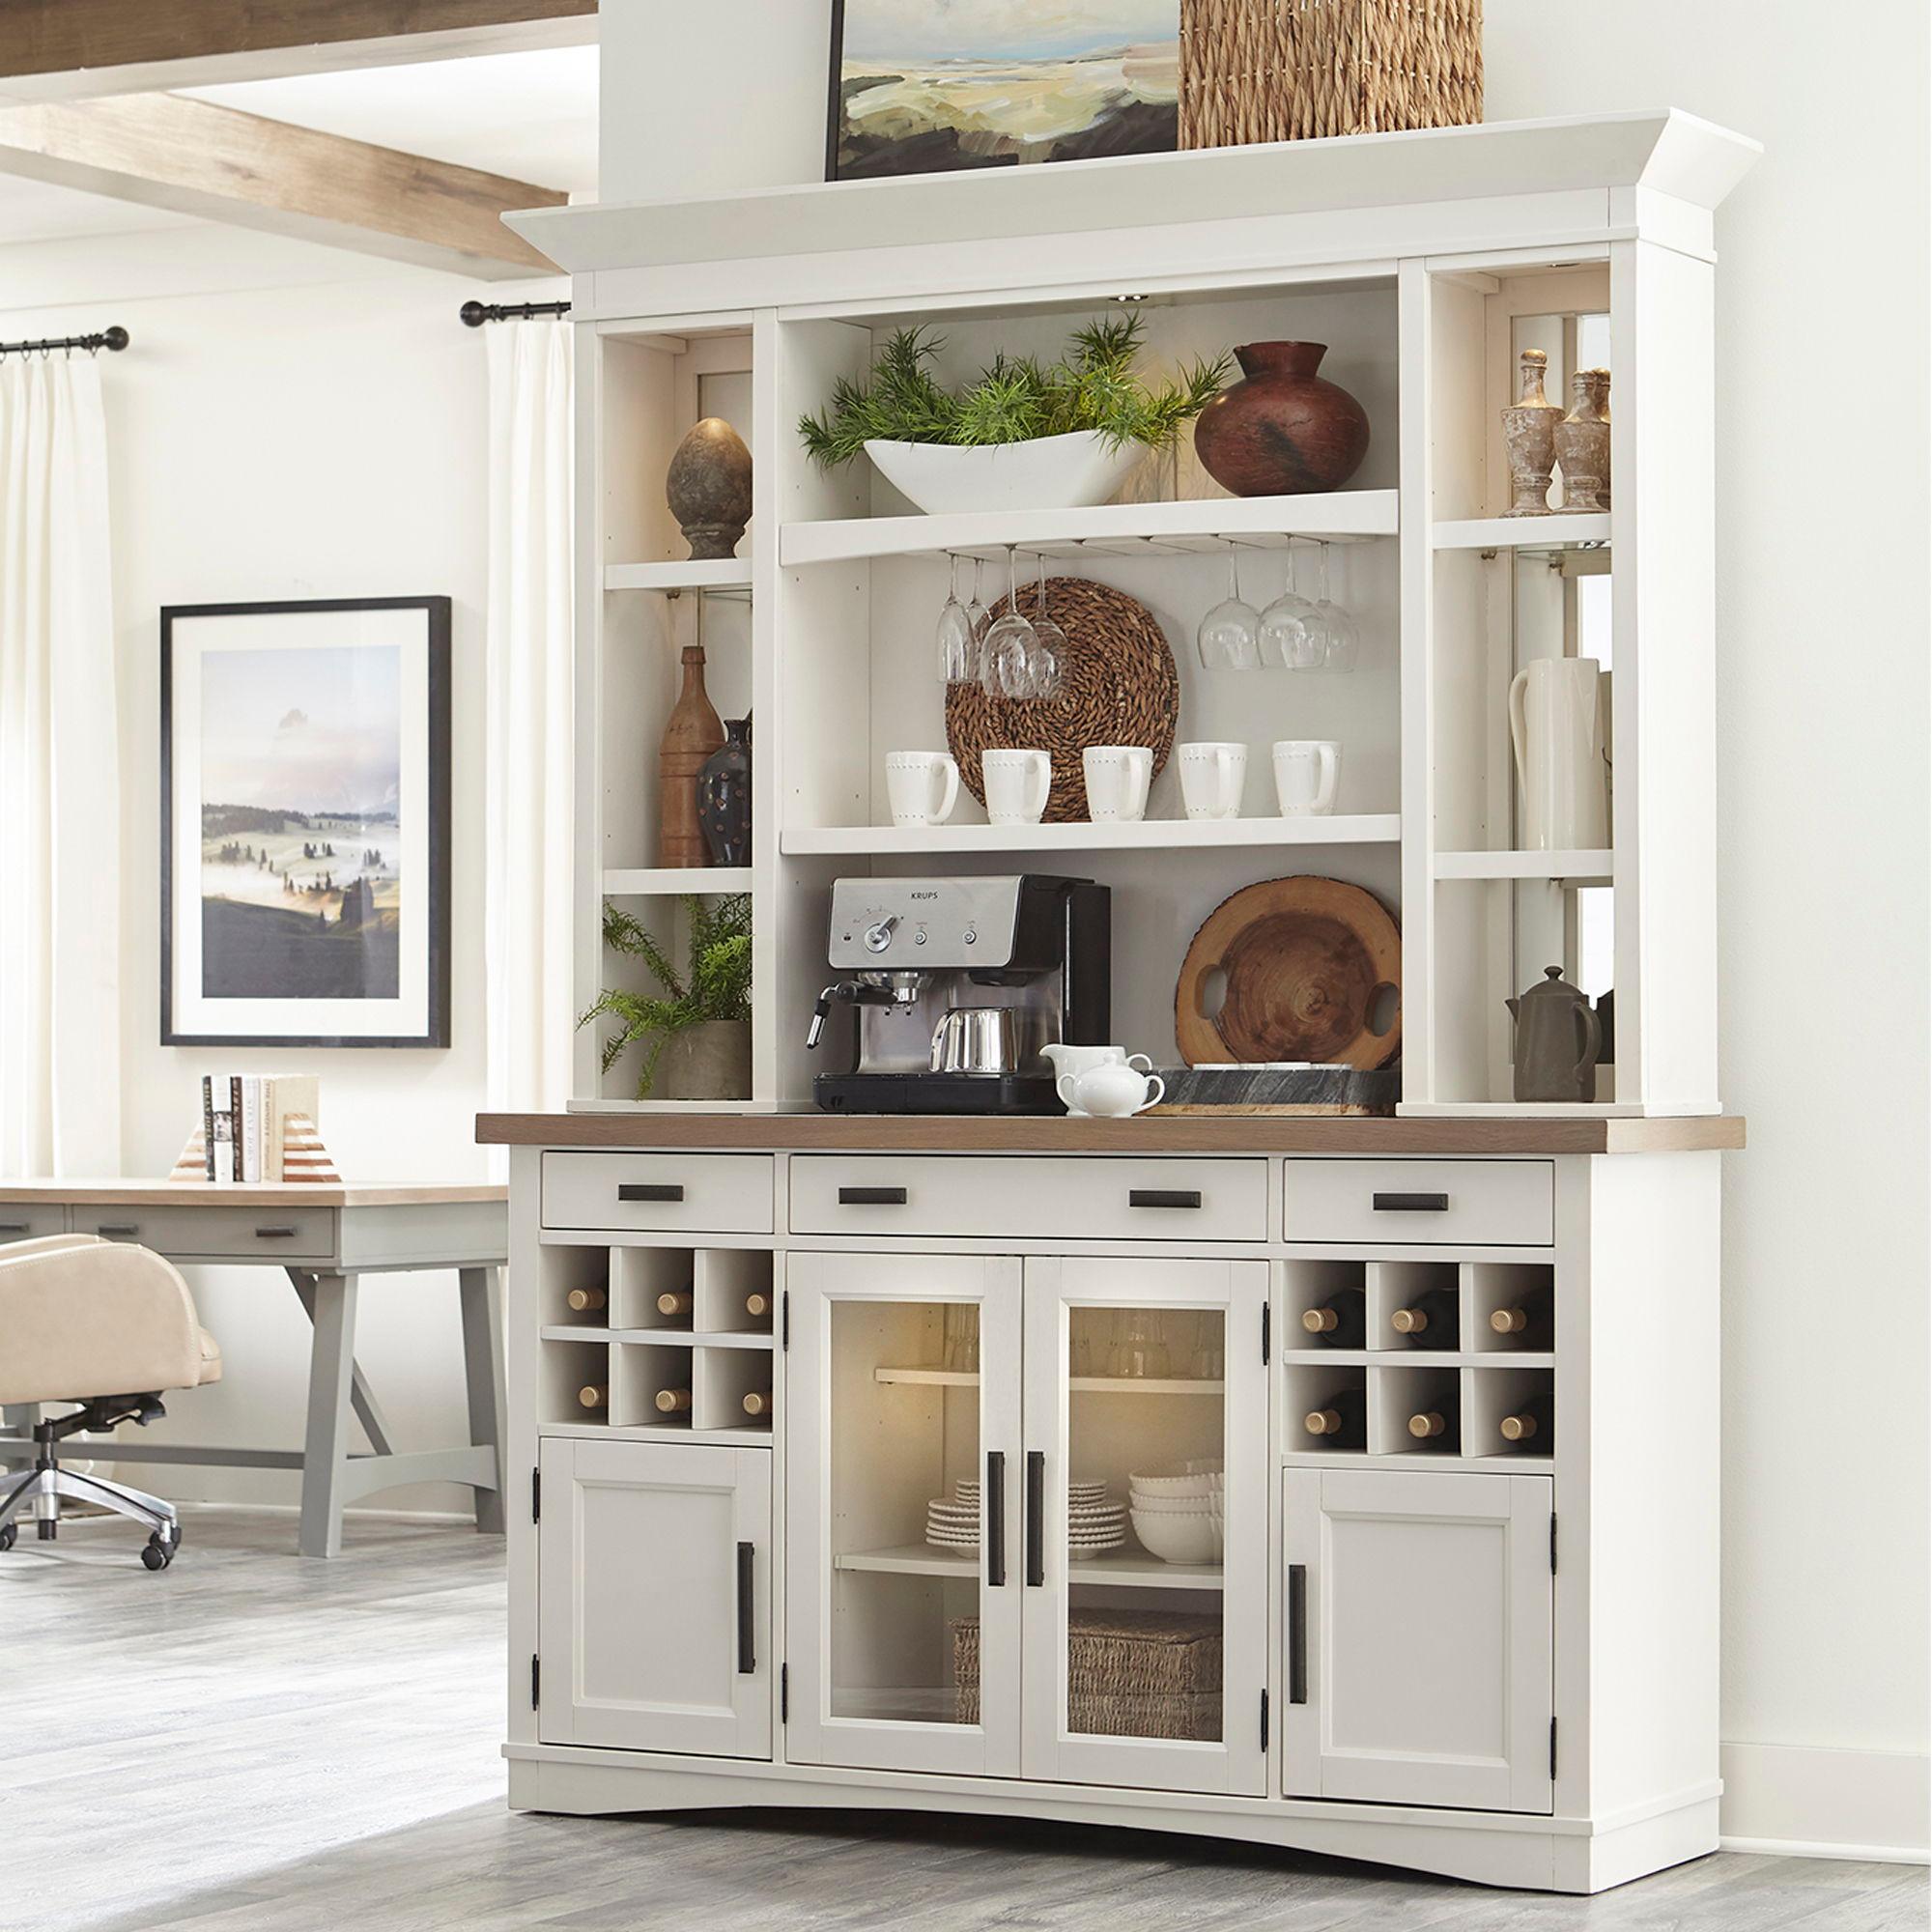 Parker House - Americana Modern Dining - Buffet and Display Hutch - Cotton - 5th Avenue Furniture